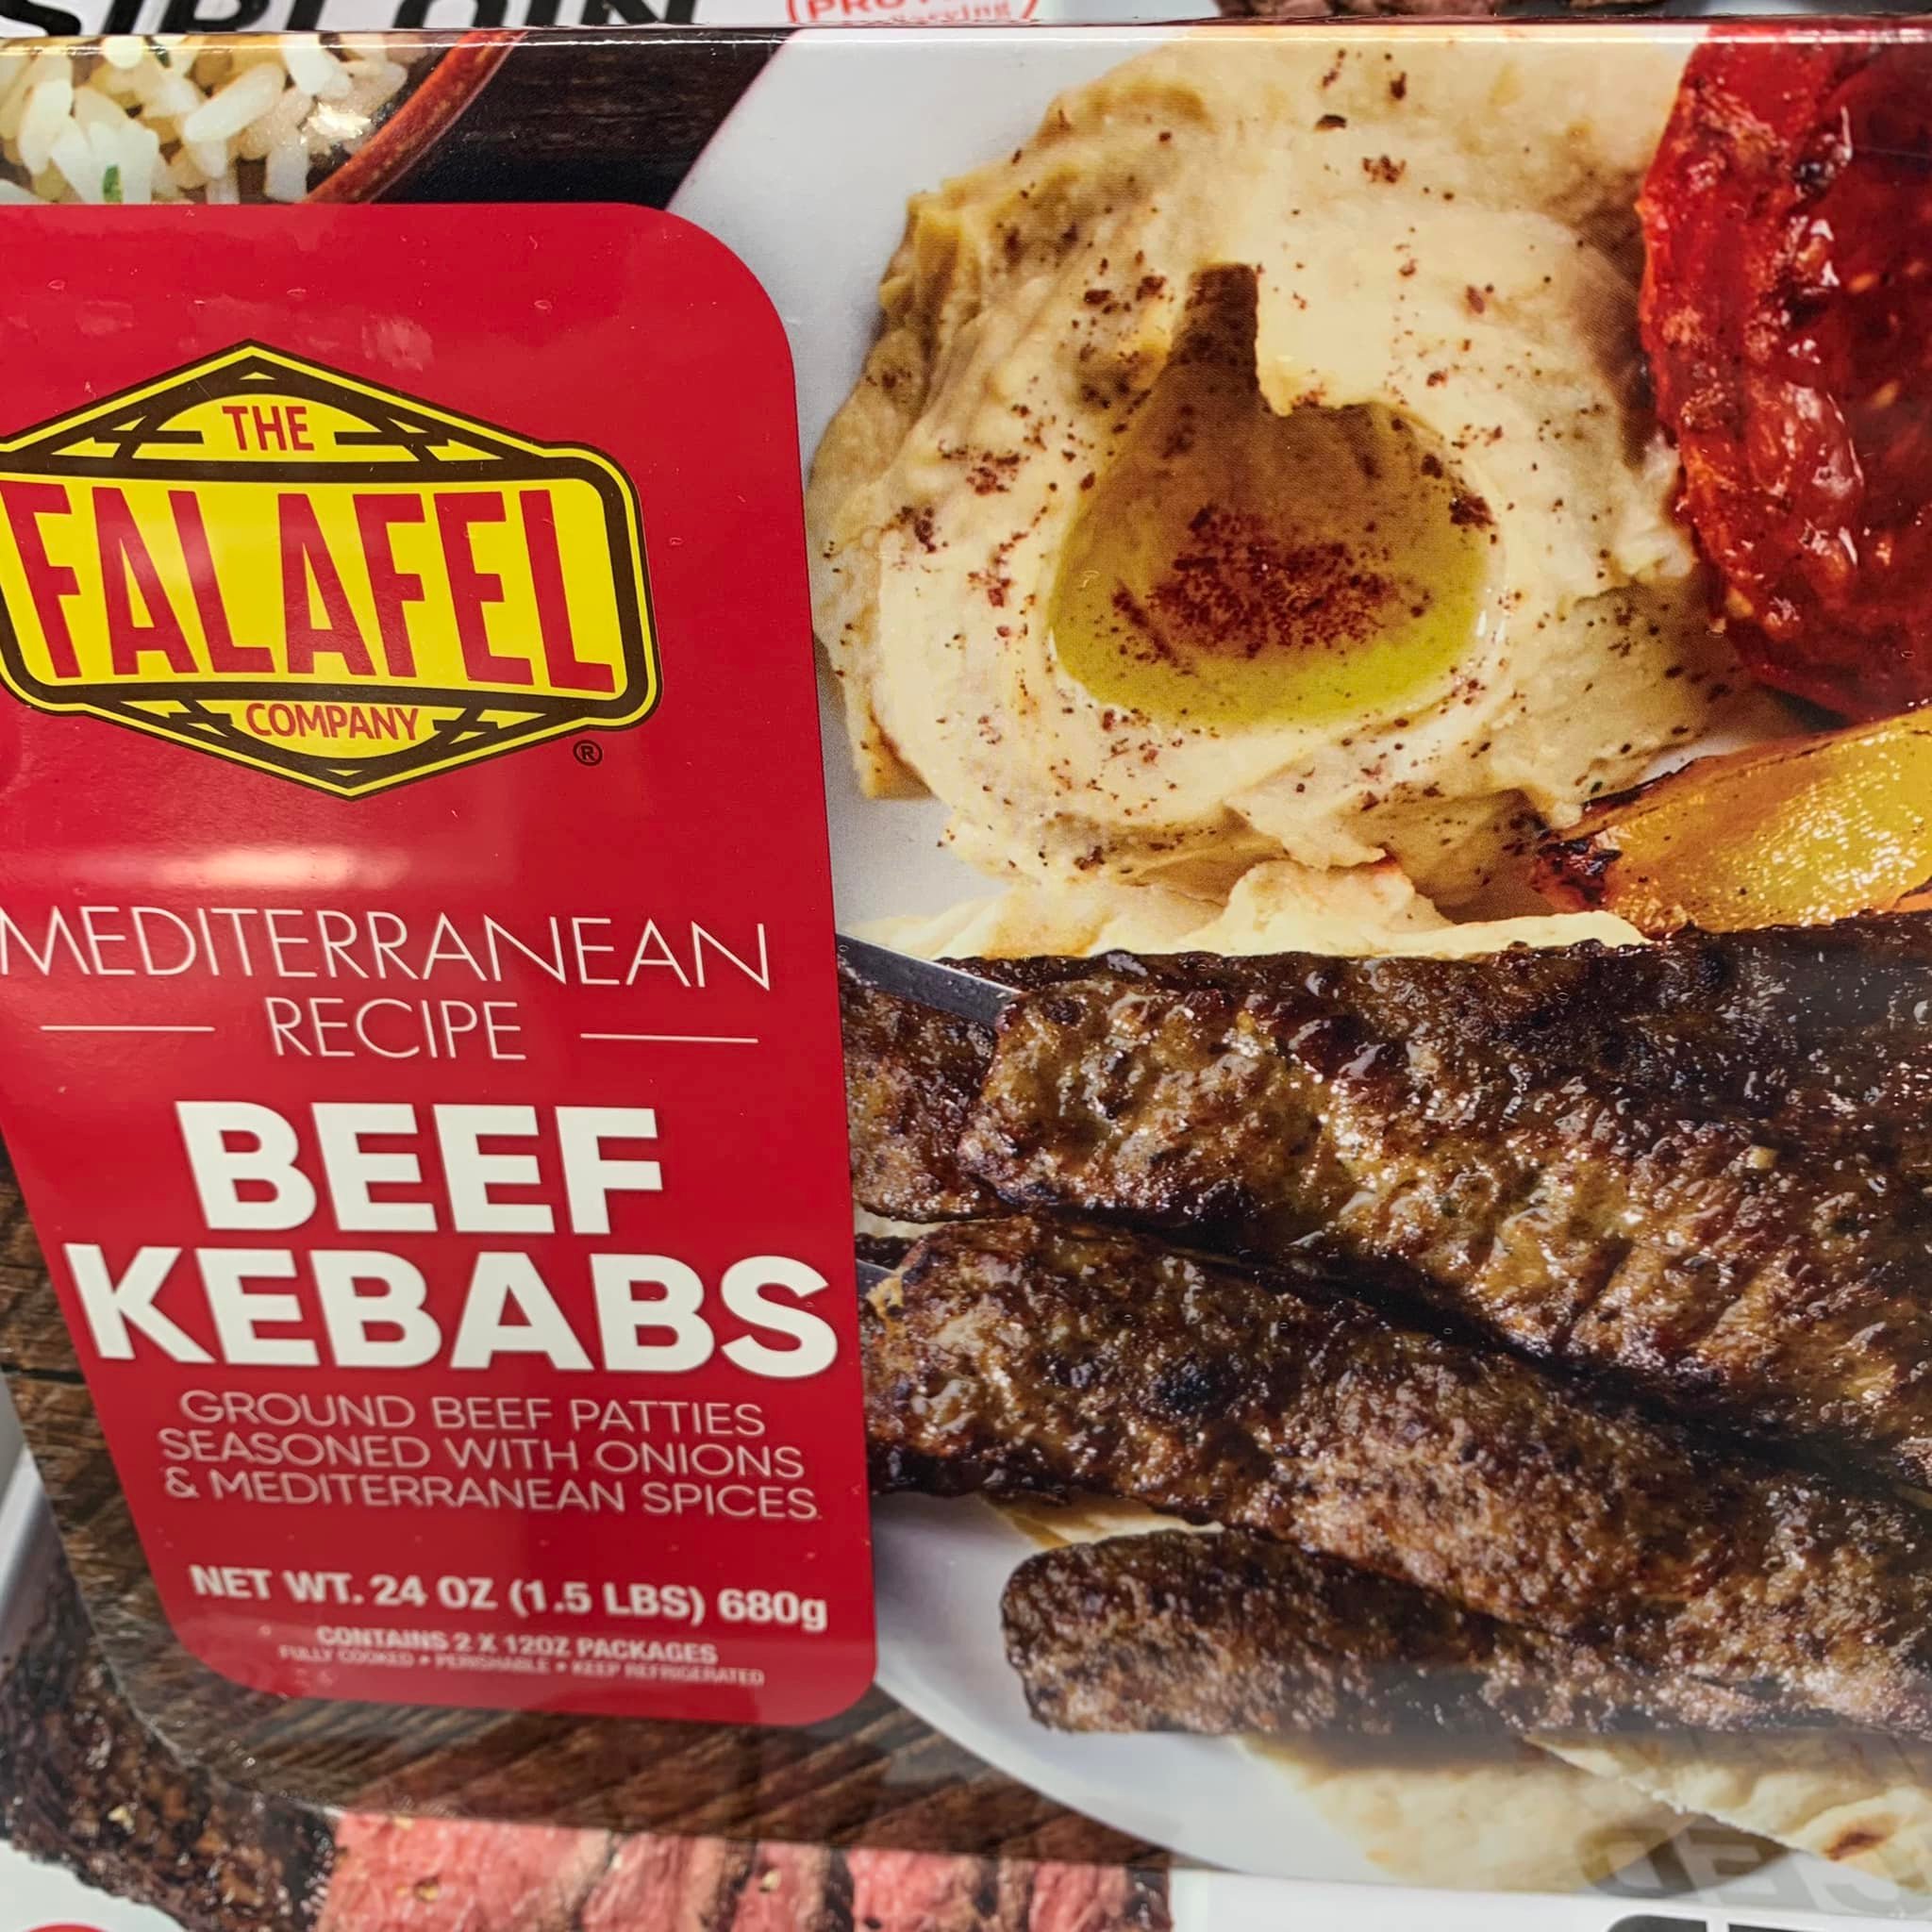 Beef kebabs: A new item I noticed at my local Costco